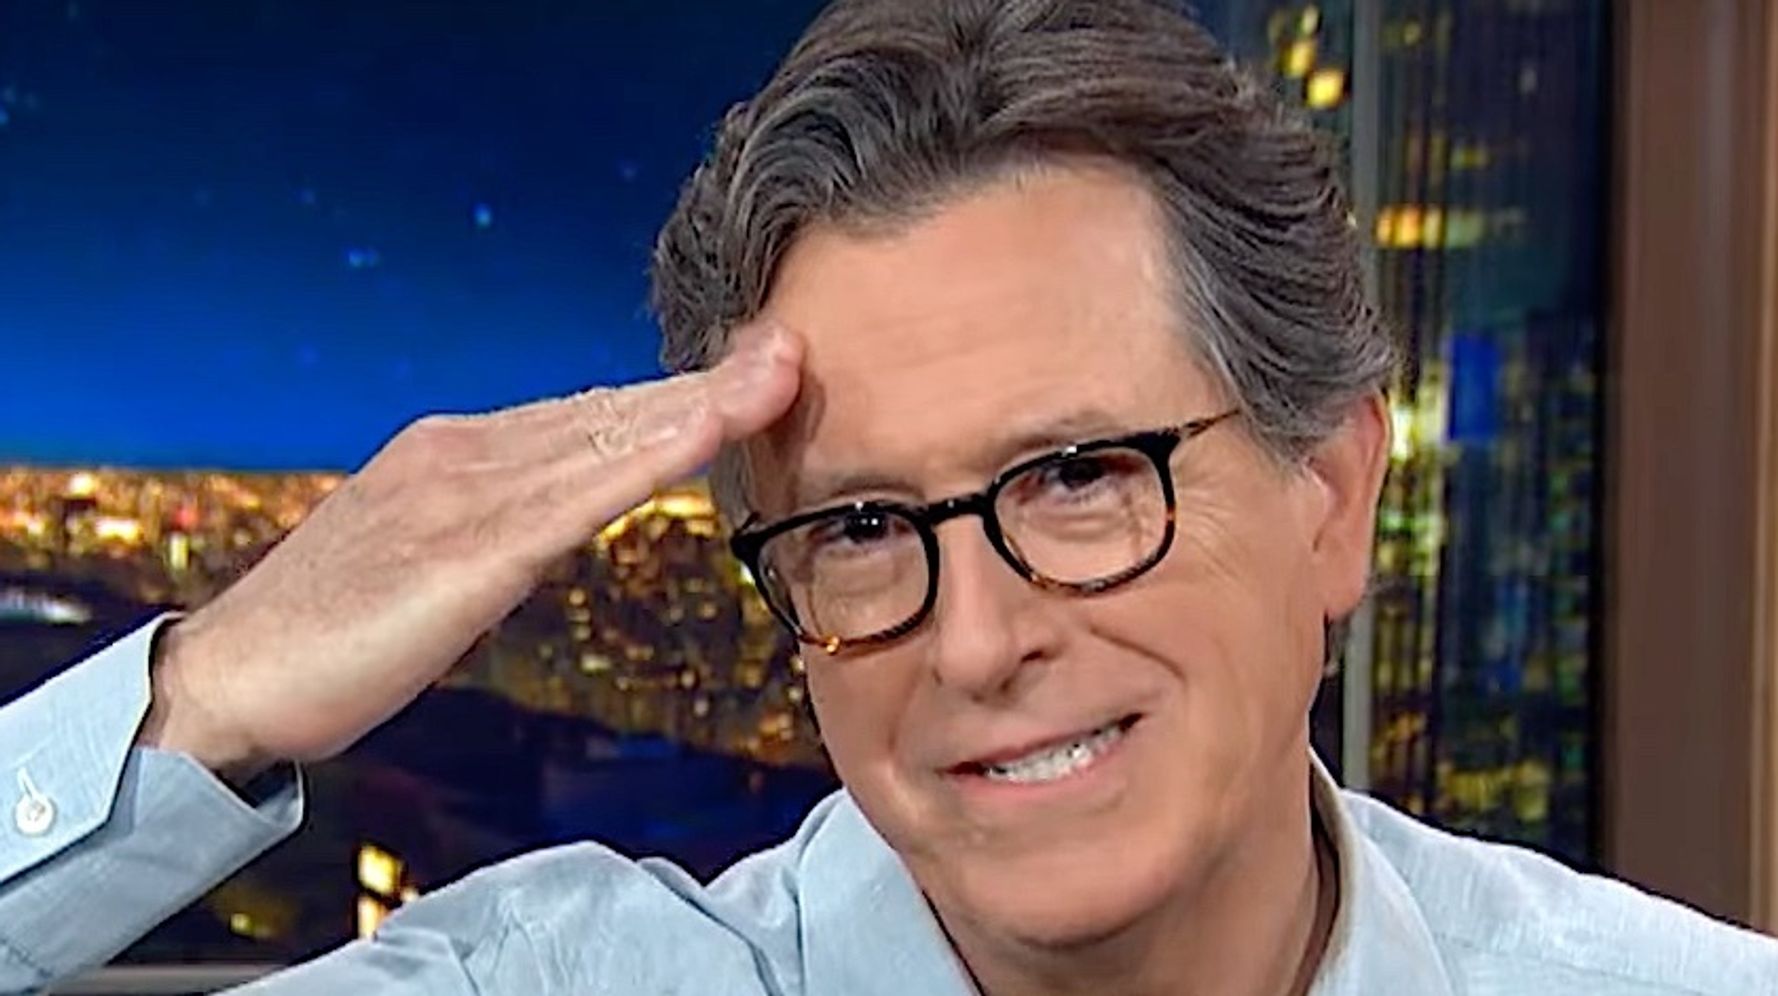 Stephen Colbert Salutes Anti-Trump Military Prank By Banging Out Some Epic Dirty Jokes